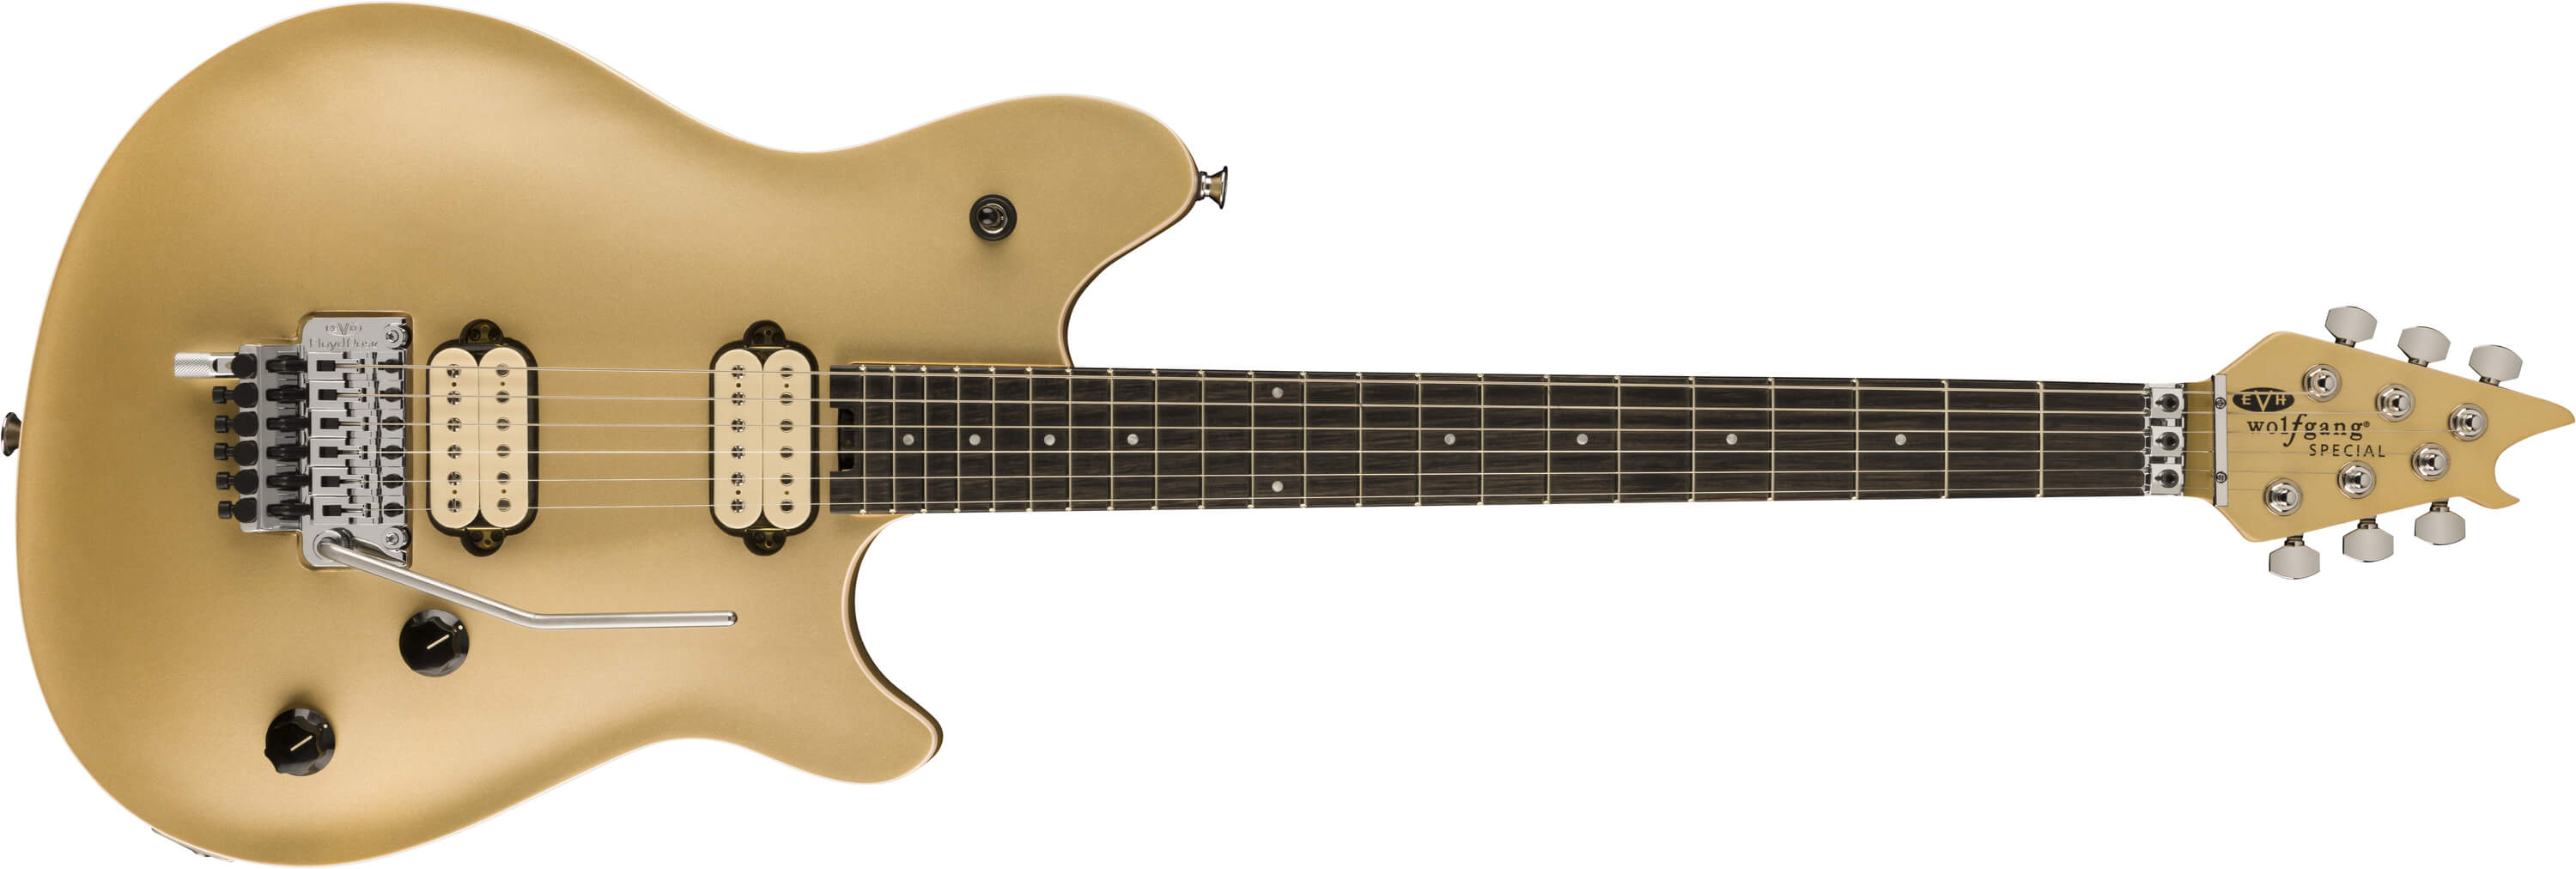 EVH Wolfgang Special in Pharaos Gold